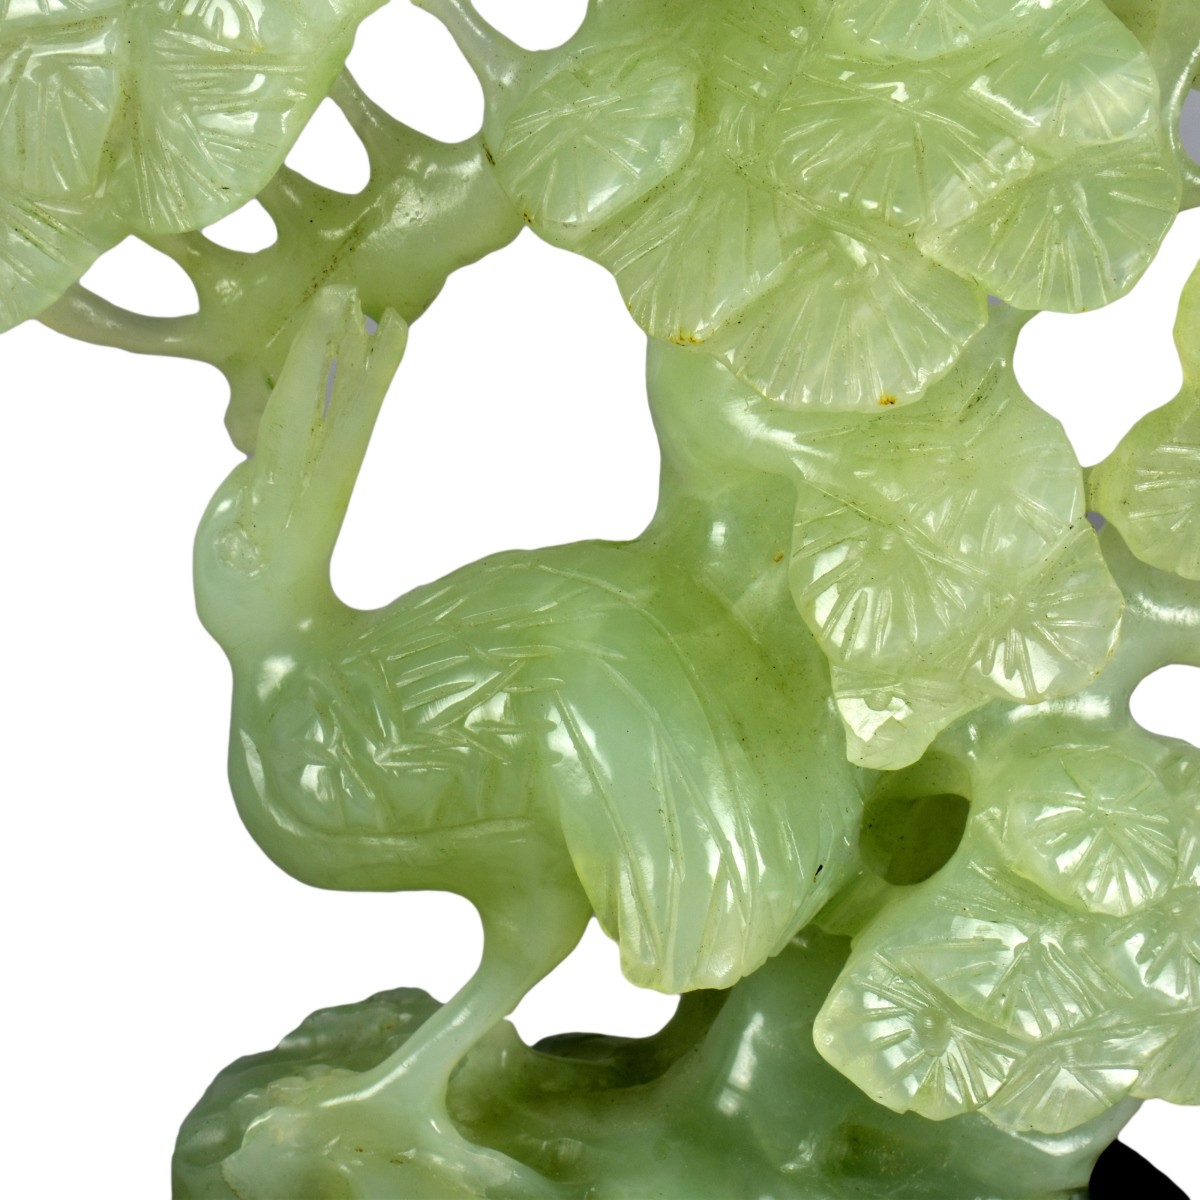 Antique Chinese Jade Group